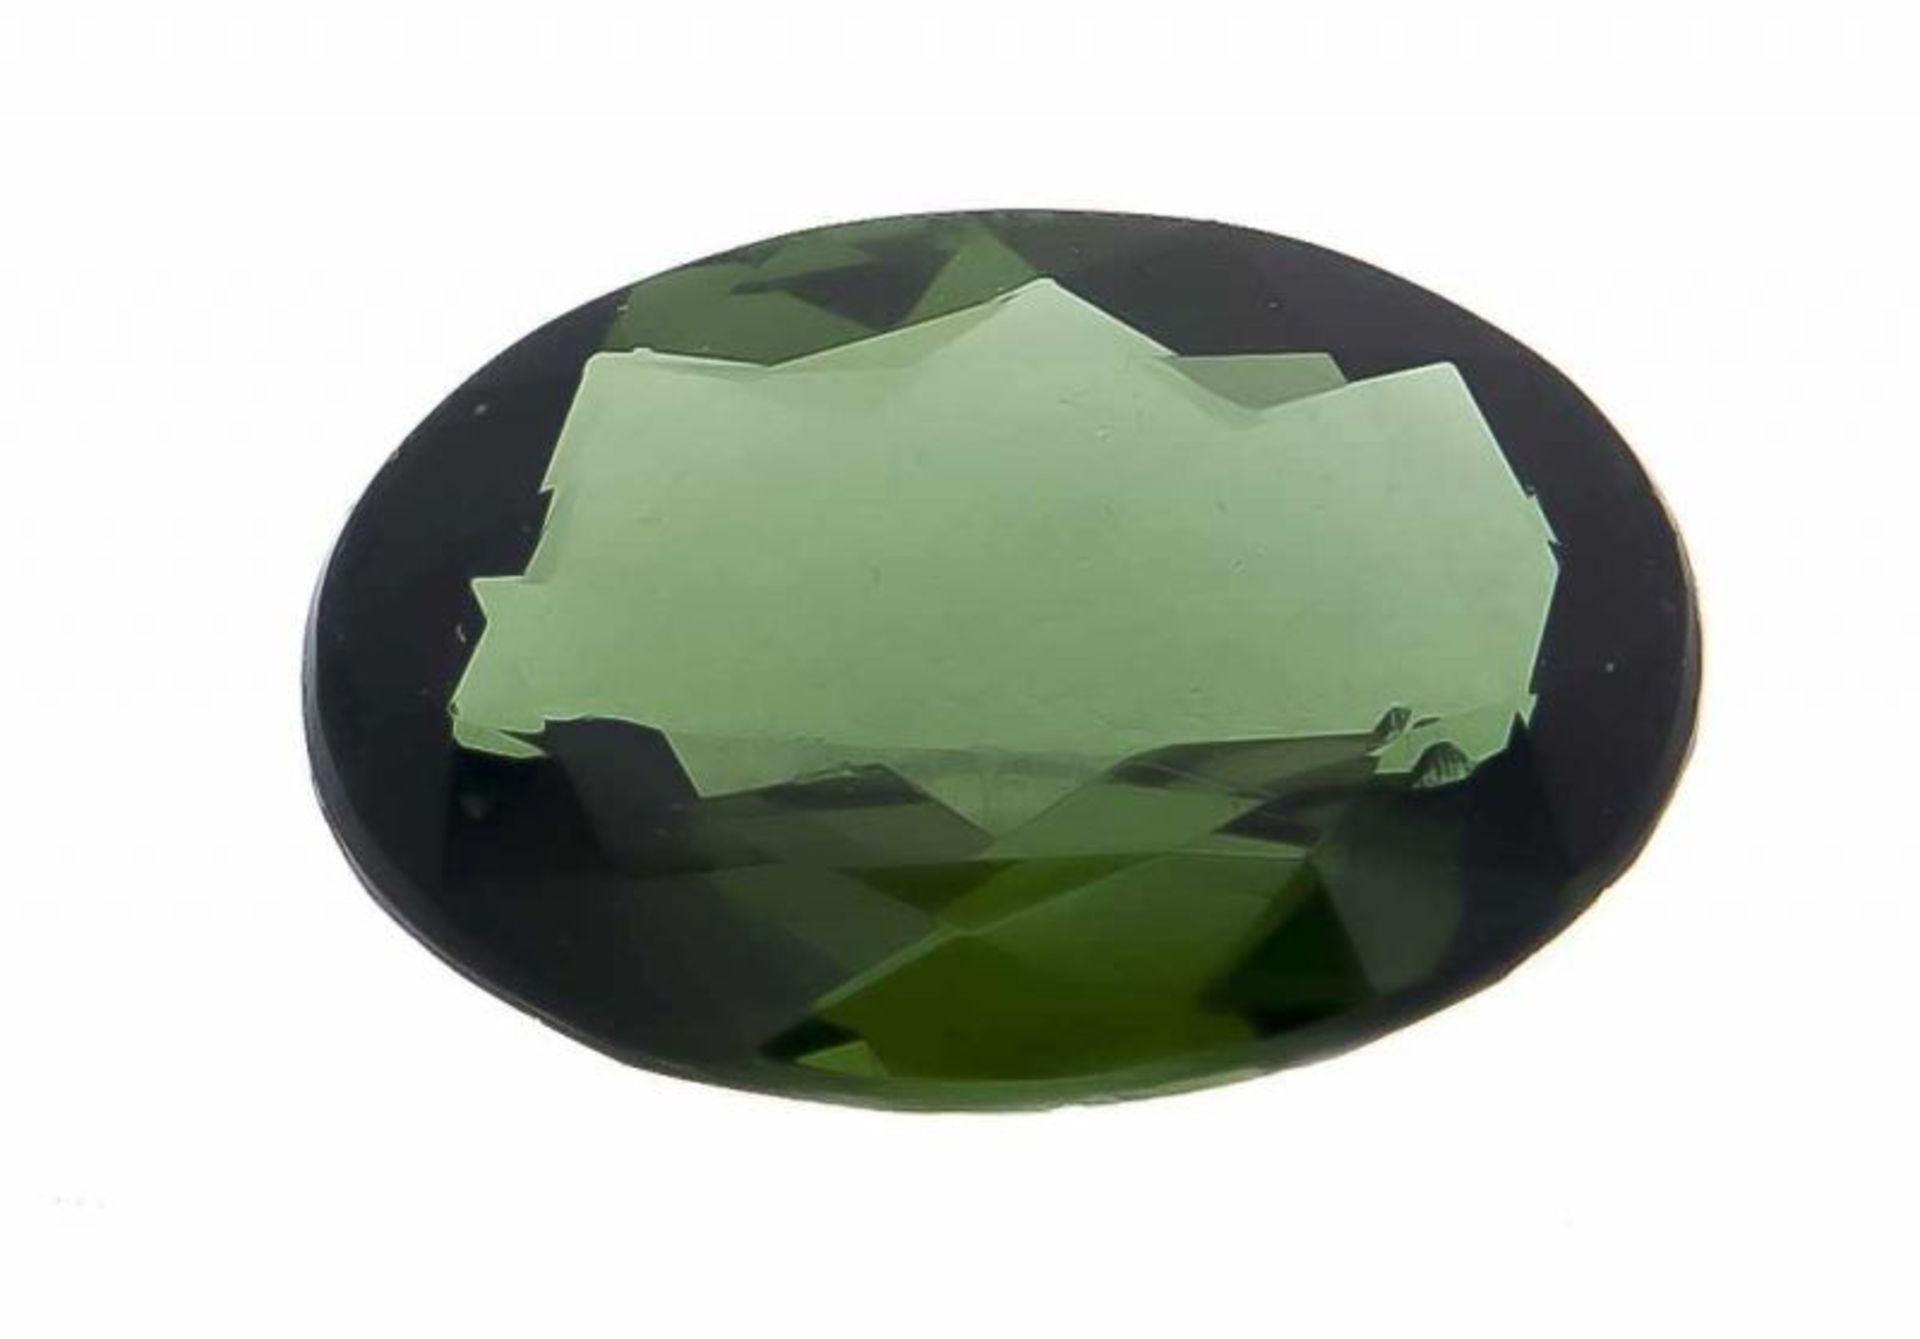 Oval shredded tourmaline, 4.62 ct. Stone is intensely green in color. Dimensions: 13.87 x 9.83 x 4.